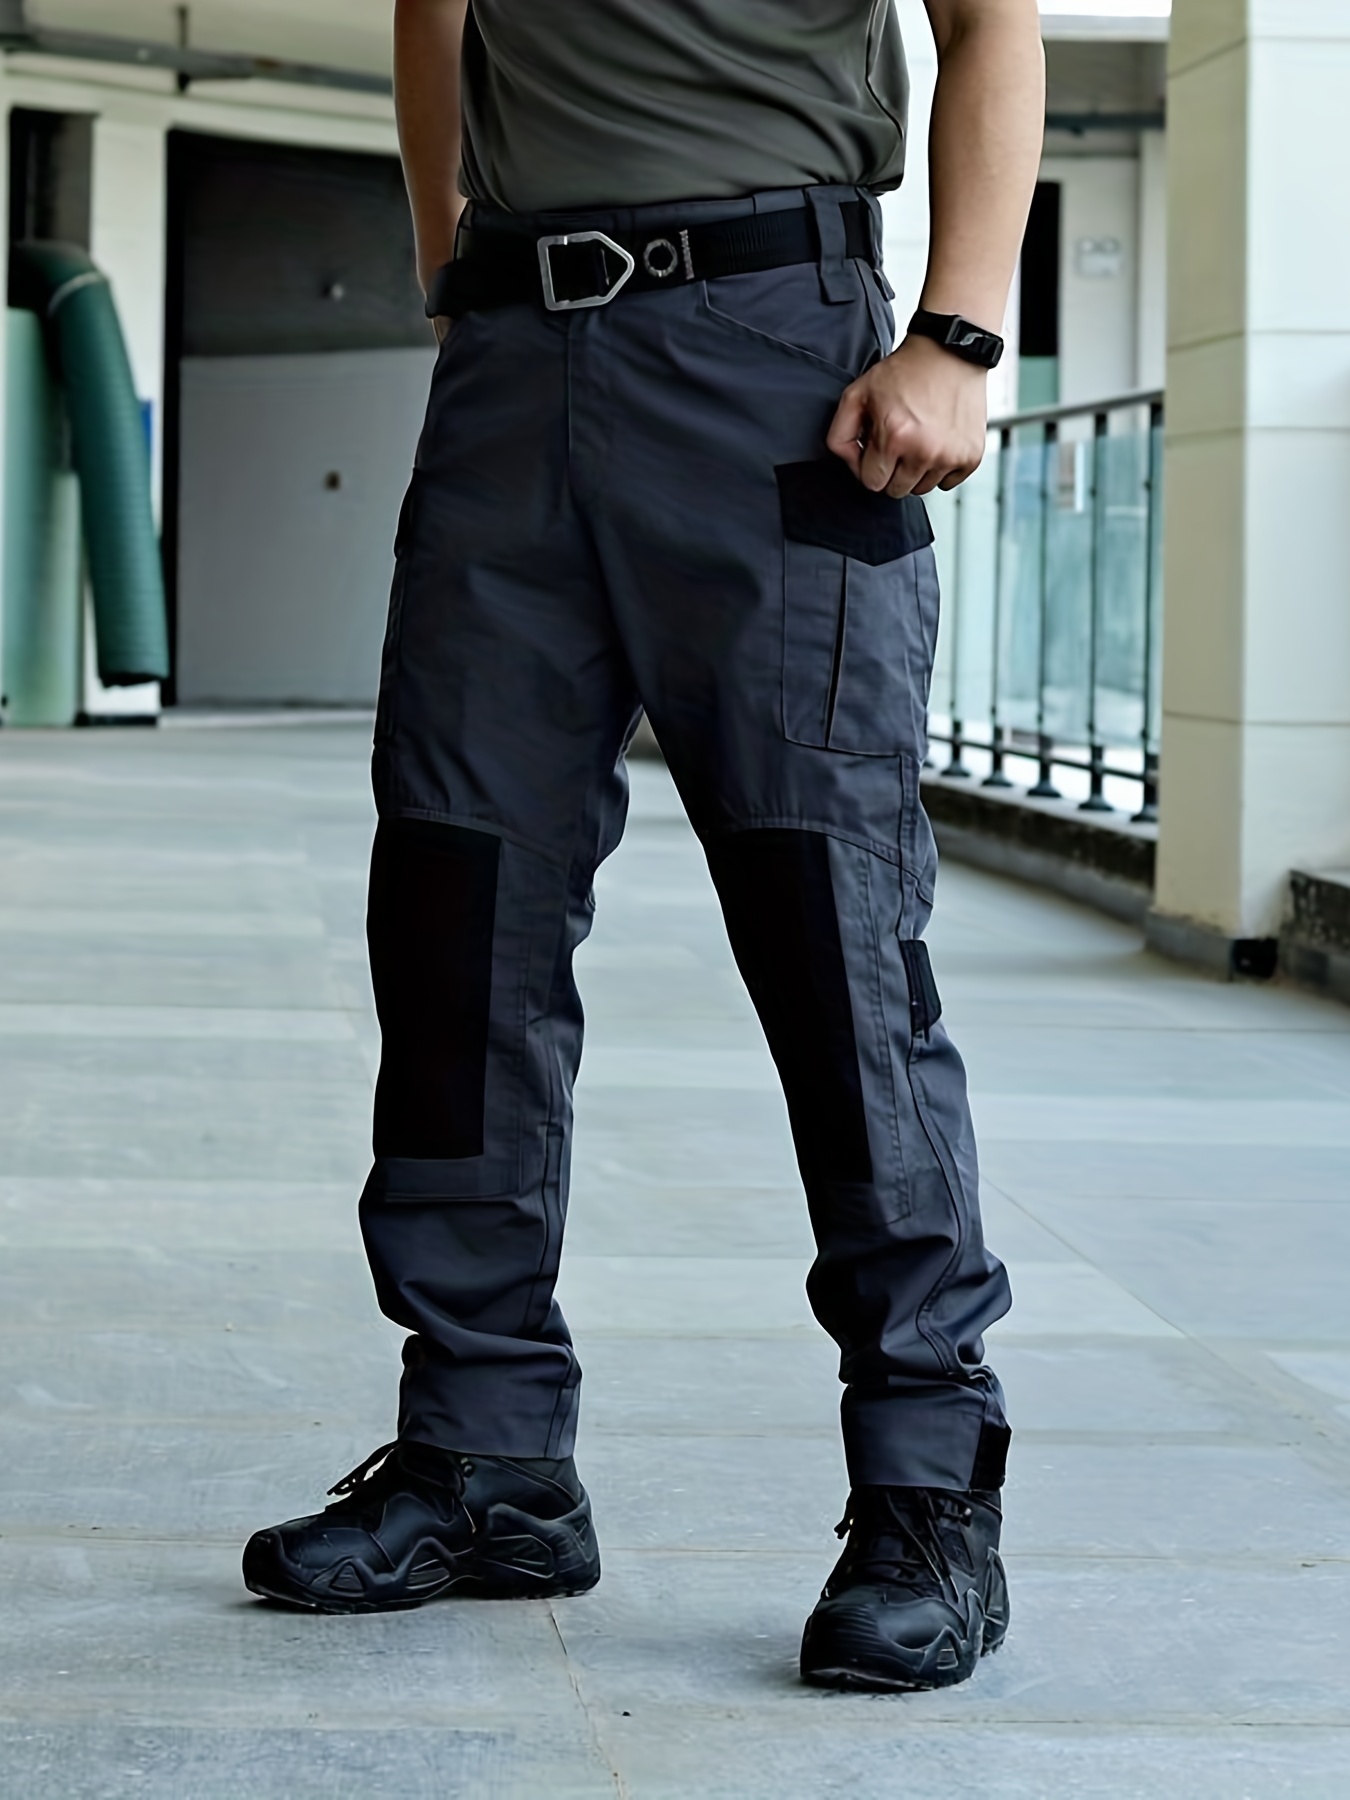 Men's Tactical Pants Combat Cargo Military Multi Pockets Ripstop Casual  Trousers